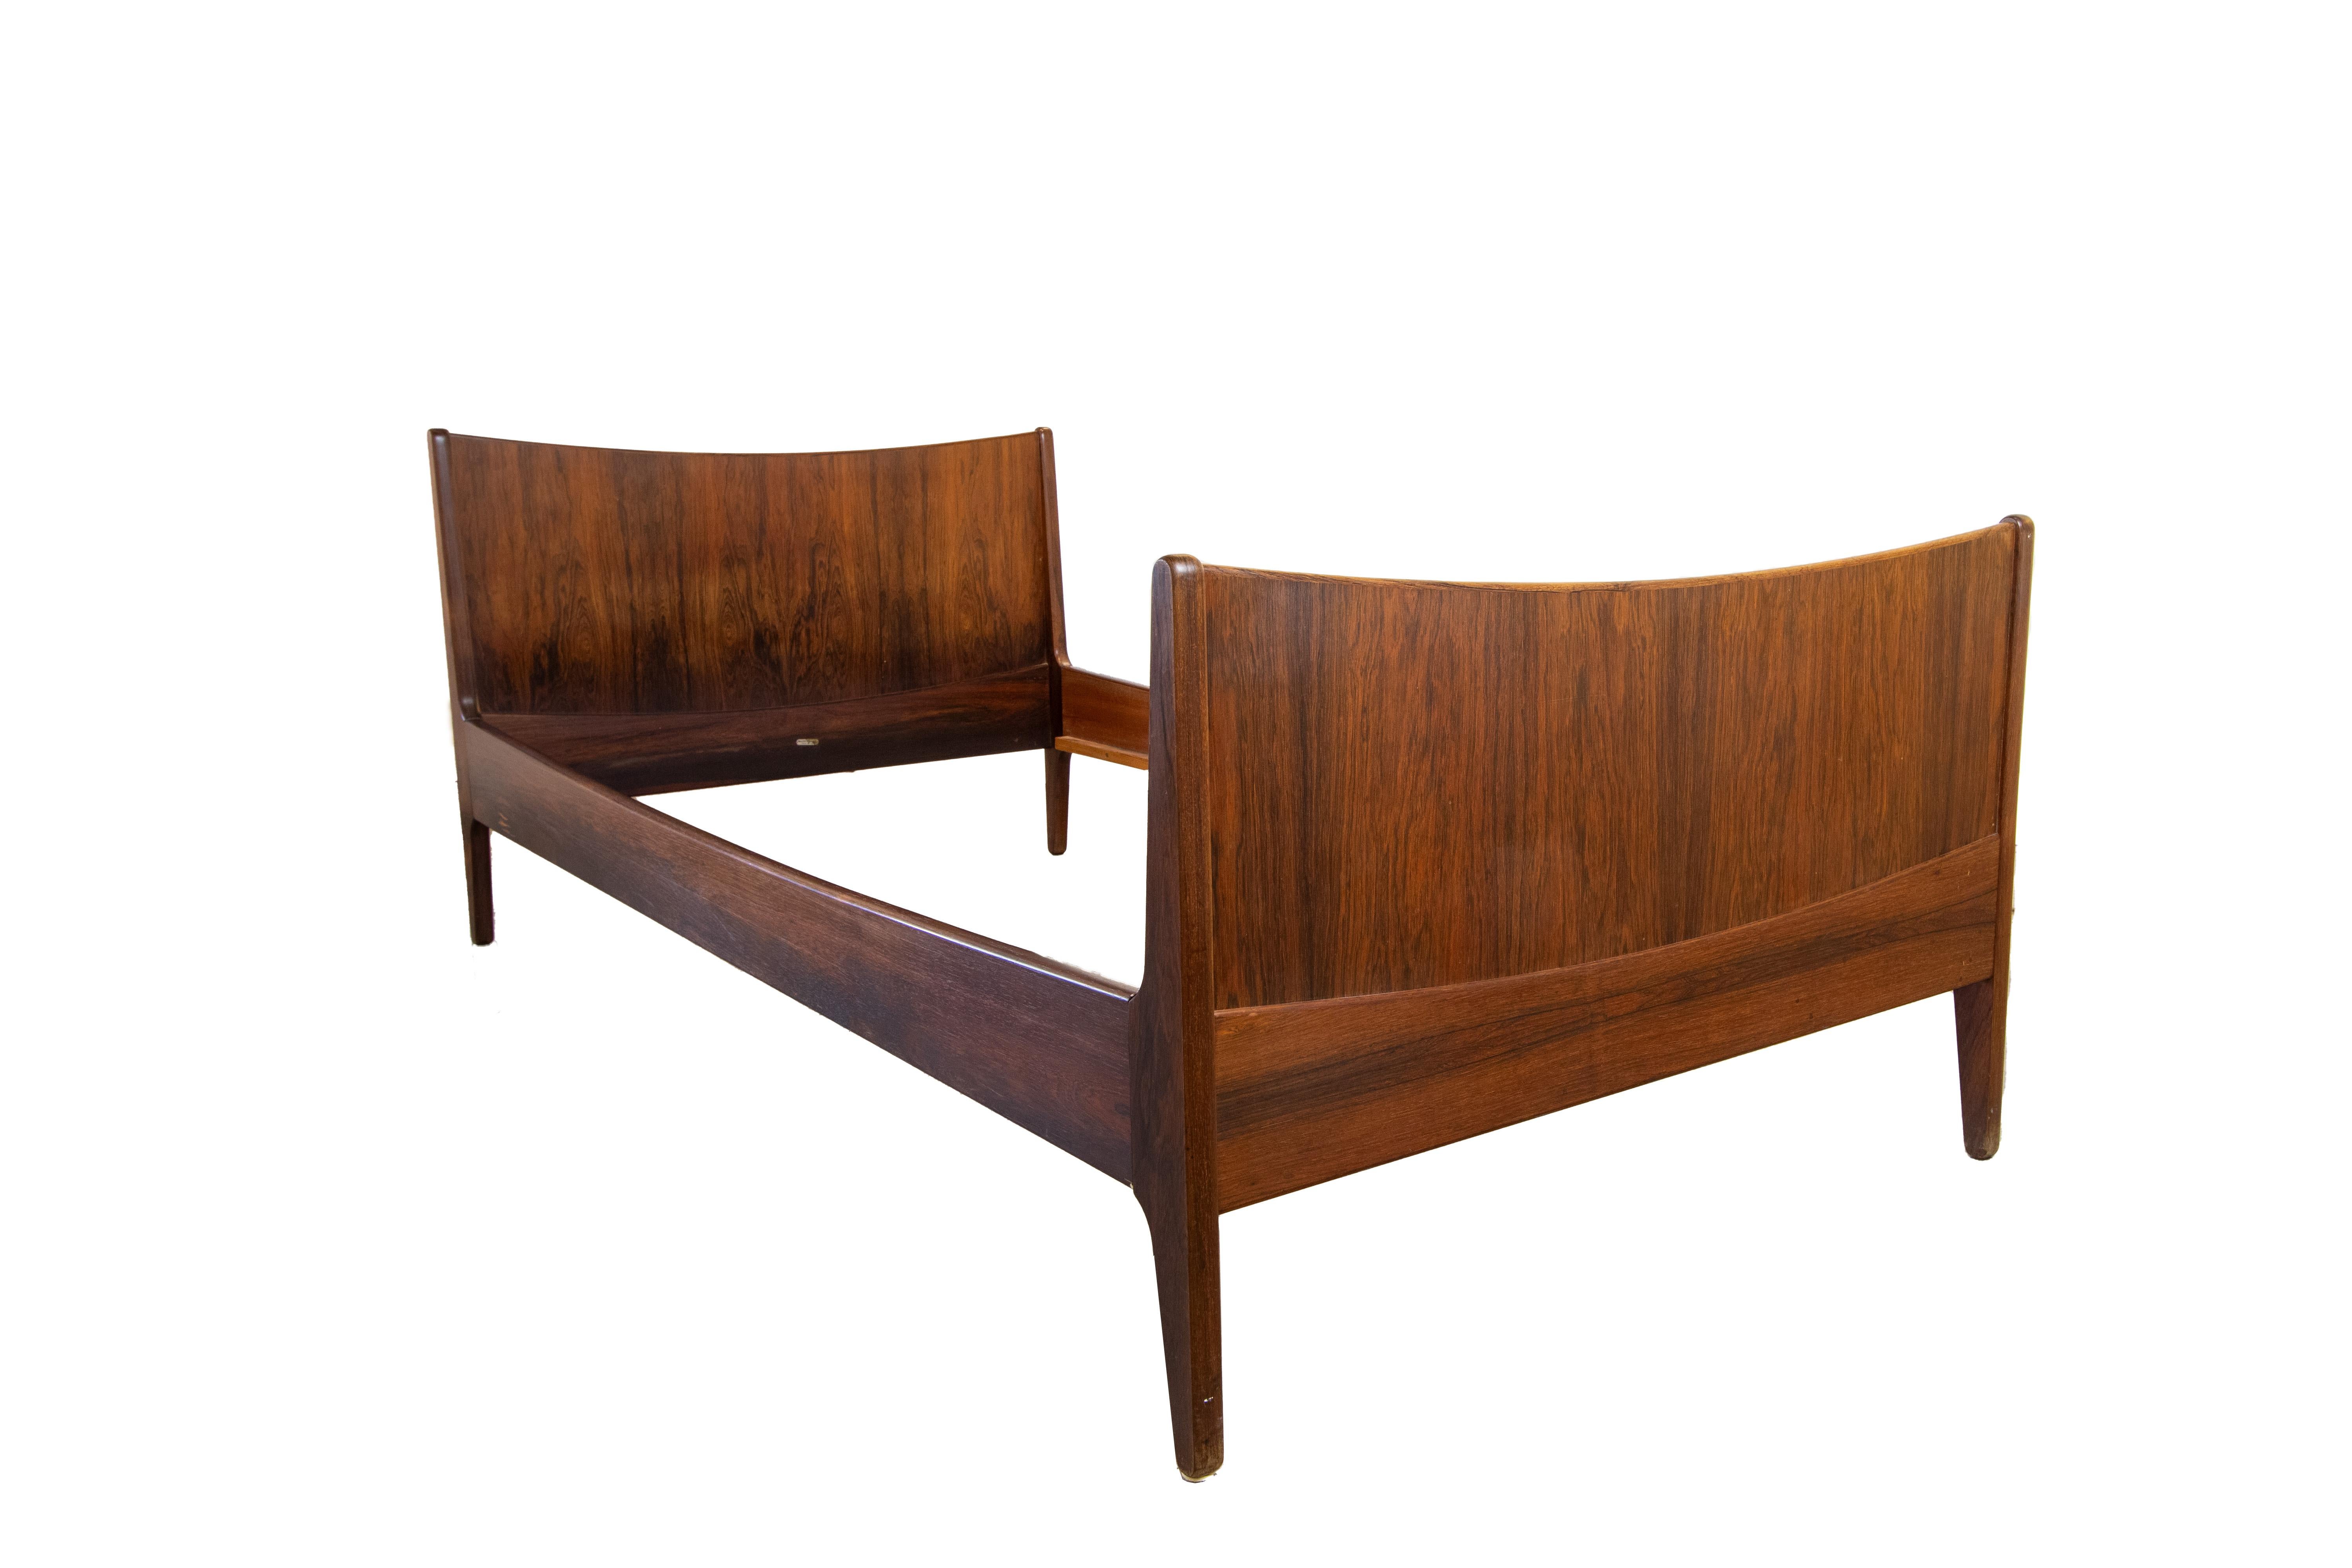 Mid-20th Century Pair of Rosewood Daybed/twin Beds designed by Harbo Solvsten by Illums Bolighus